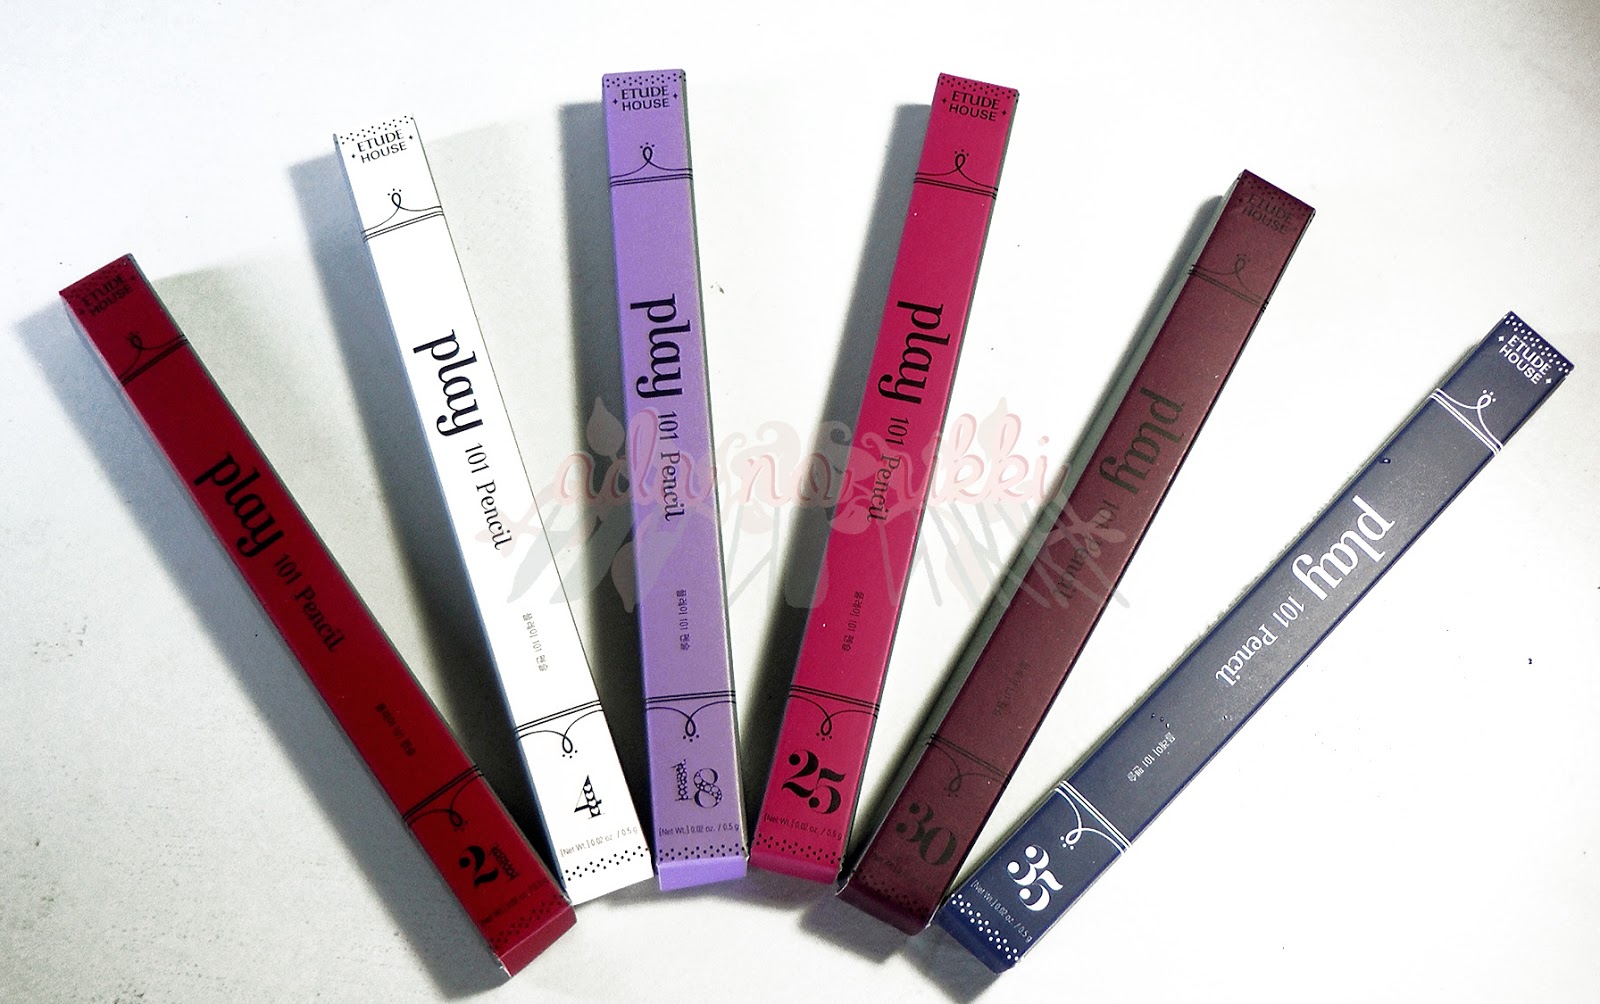 Etude House Play 101 Pencils in # 4, 18, 21, 25, 30, 35